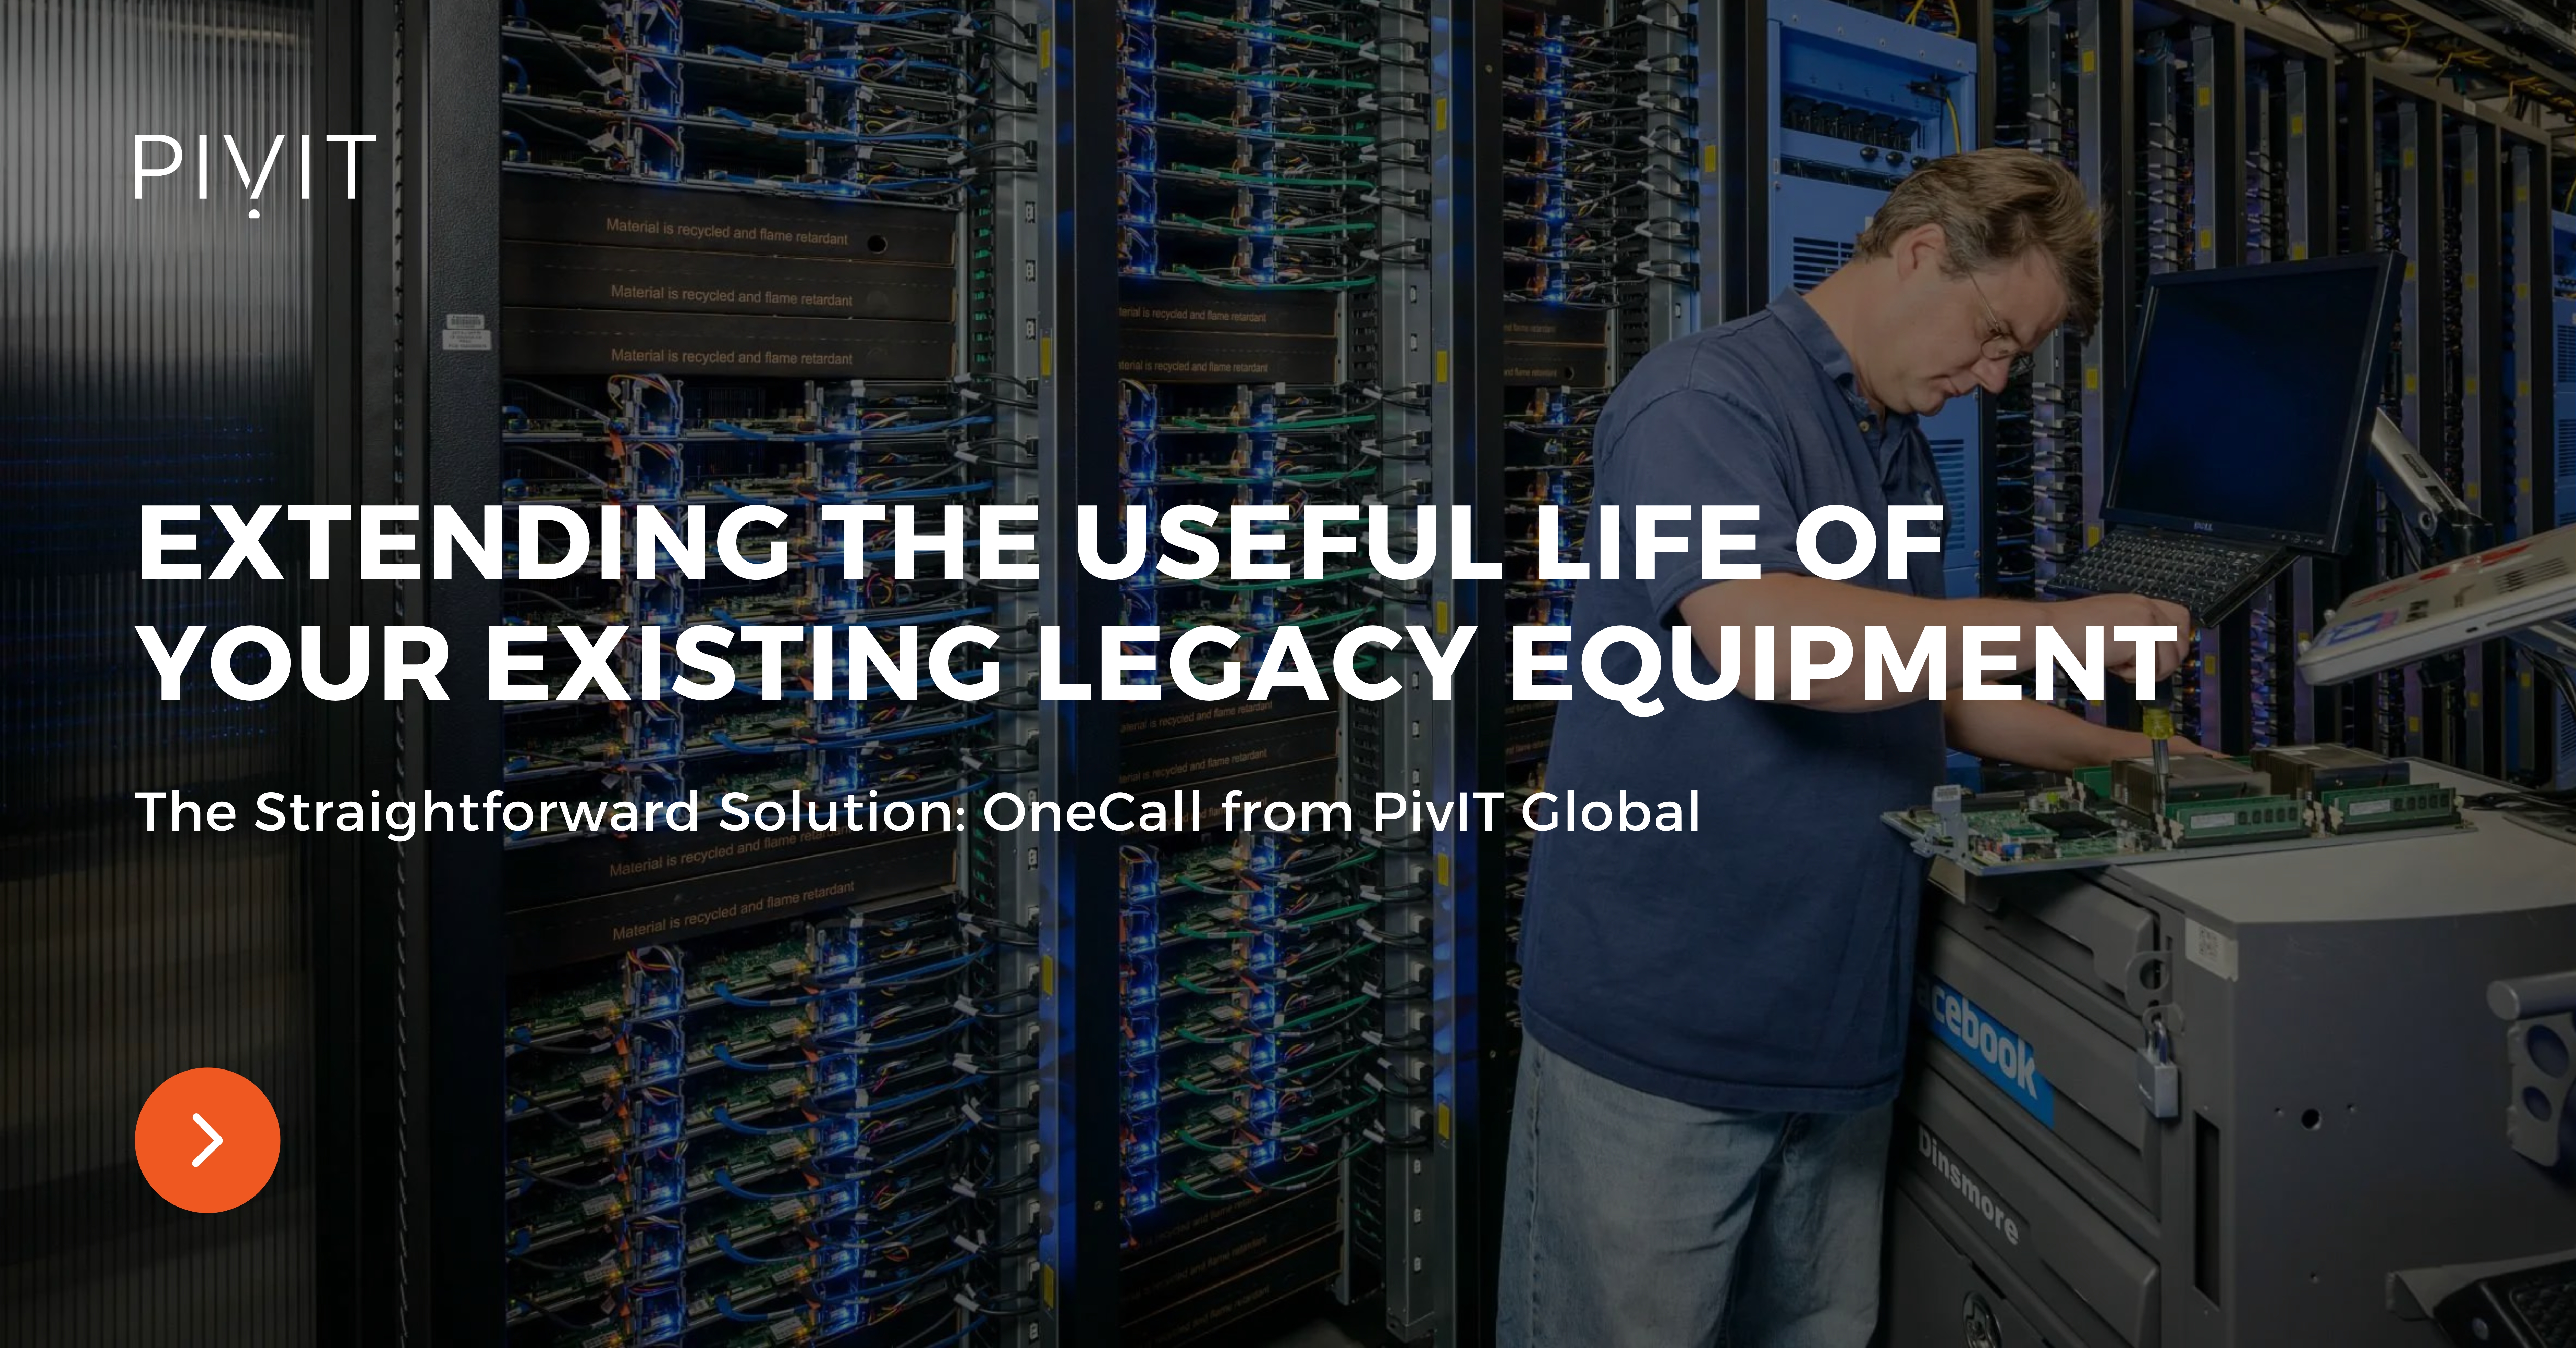 Extending the Useful Life of Your Existing Legacy Equipment